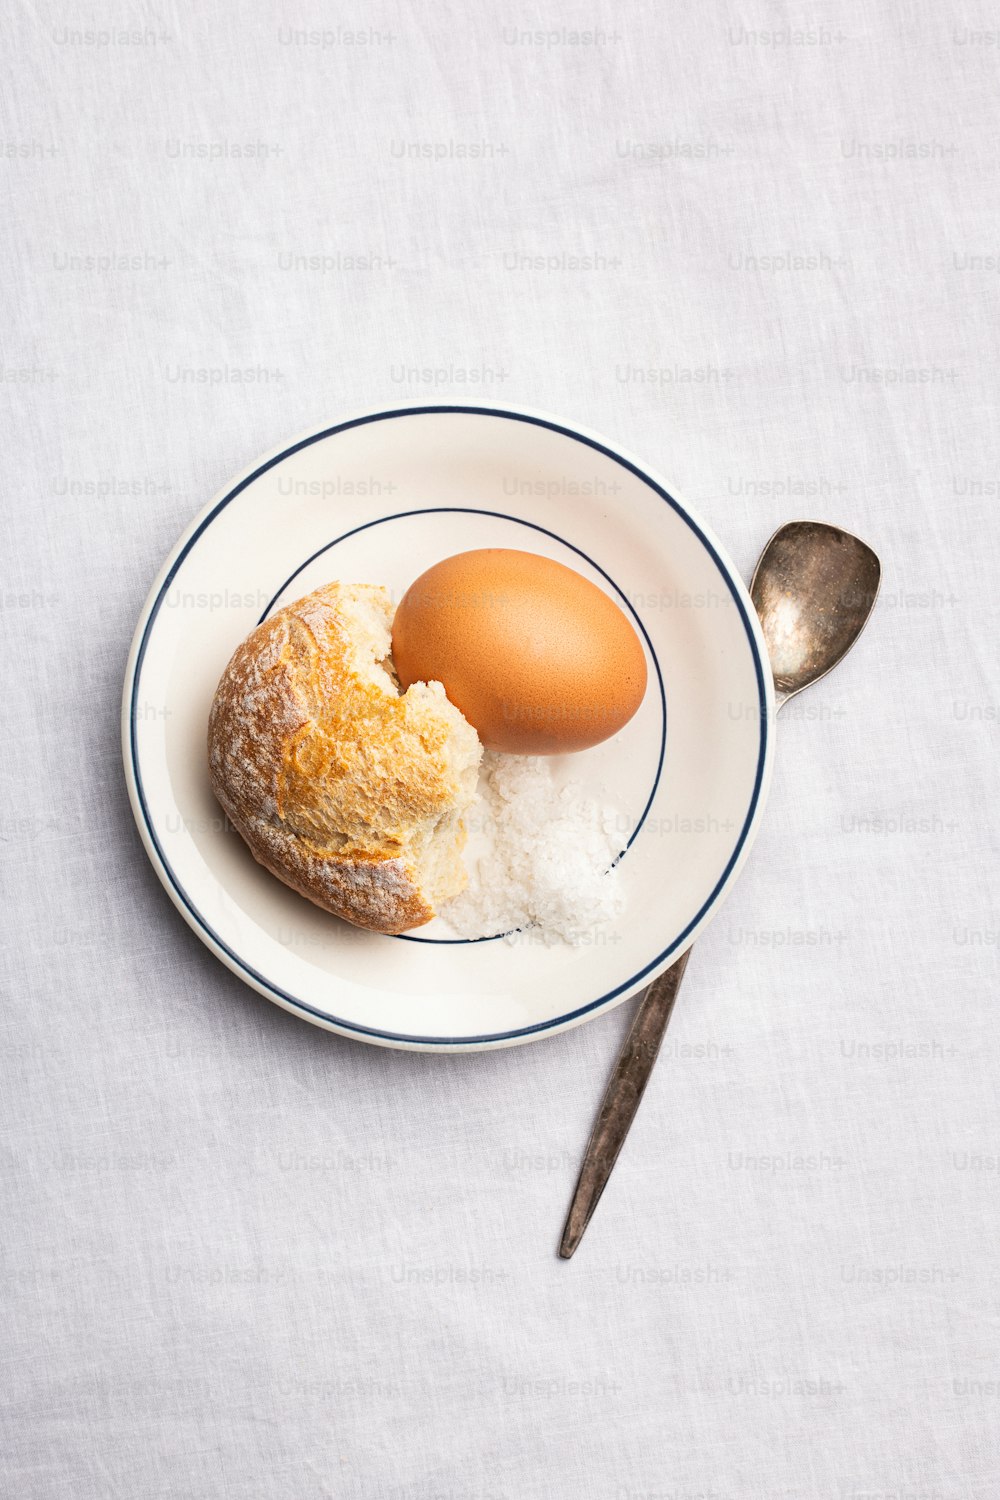 a white plate topped with a piece of bread and an egg